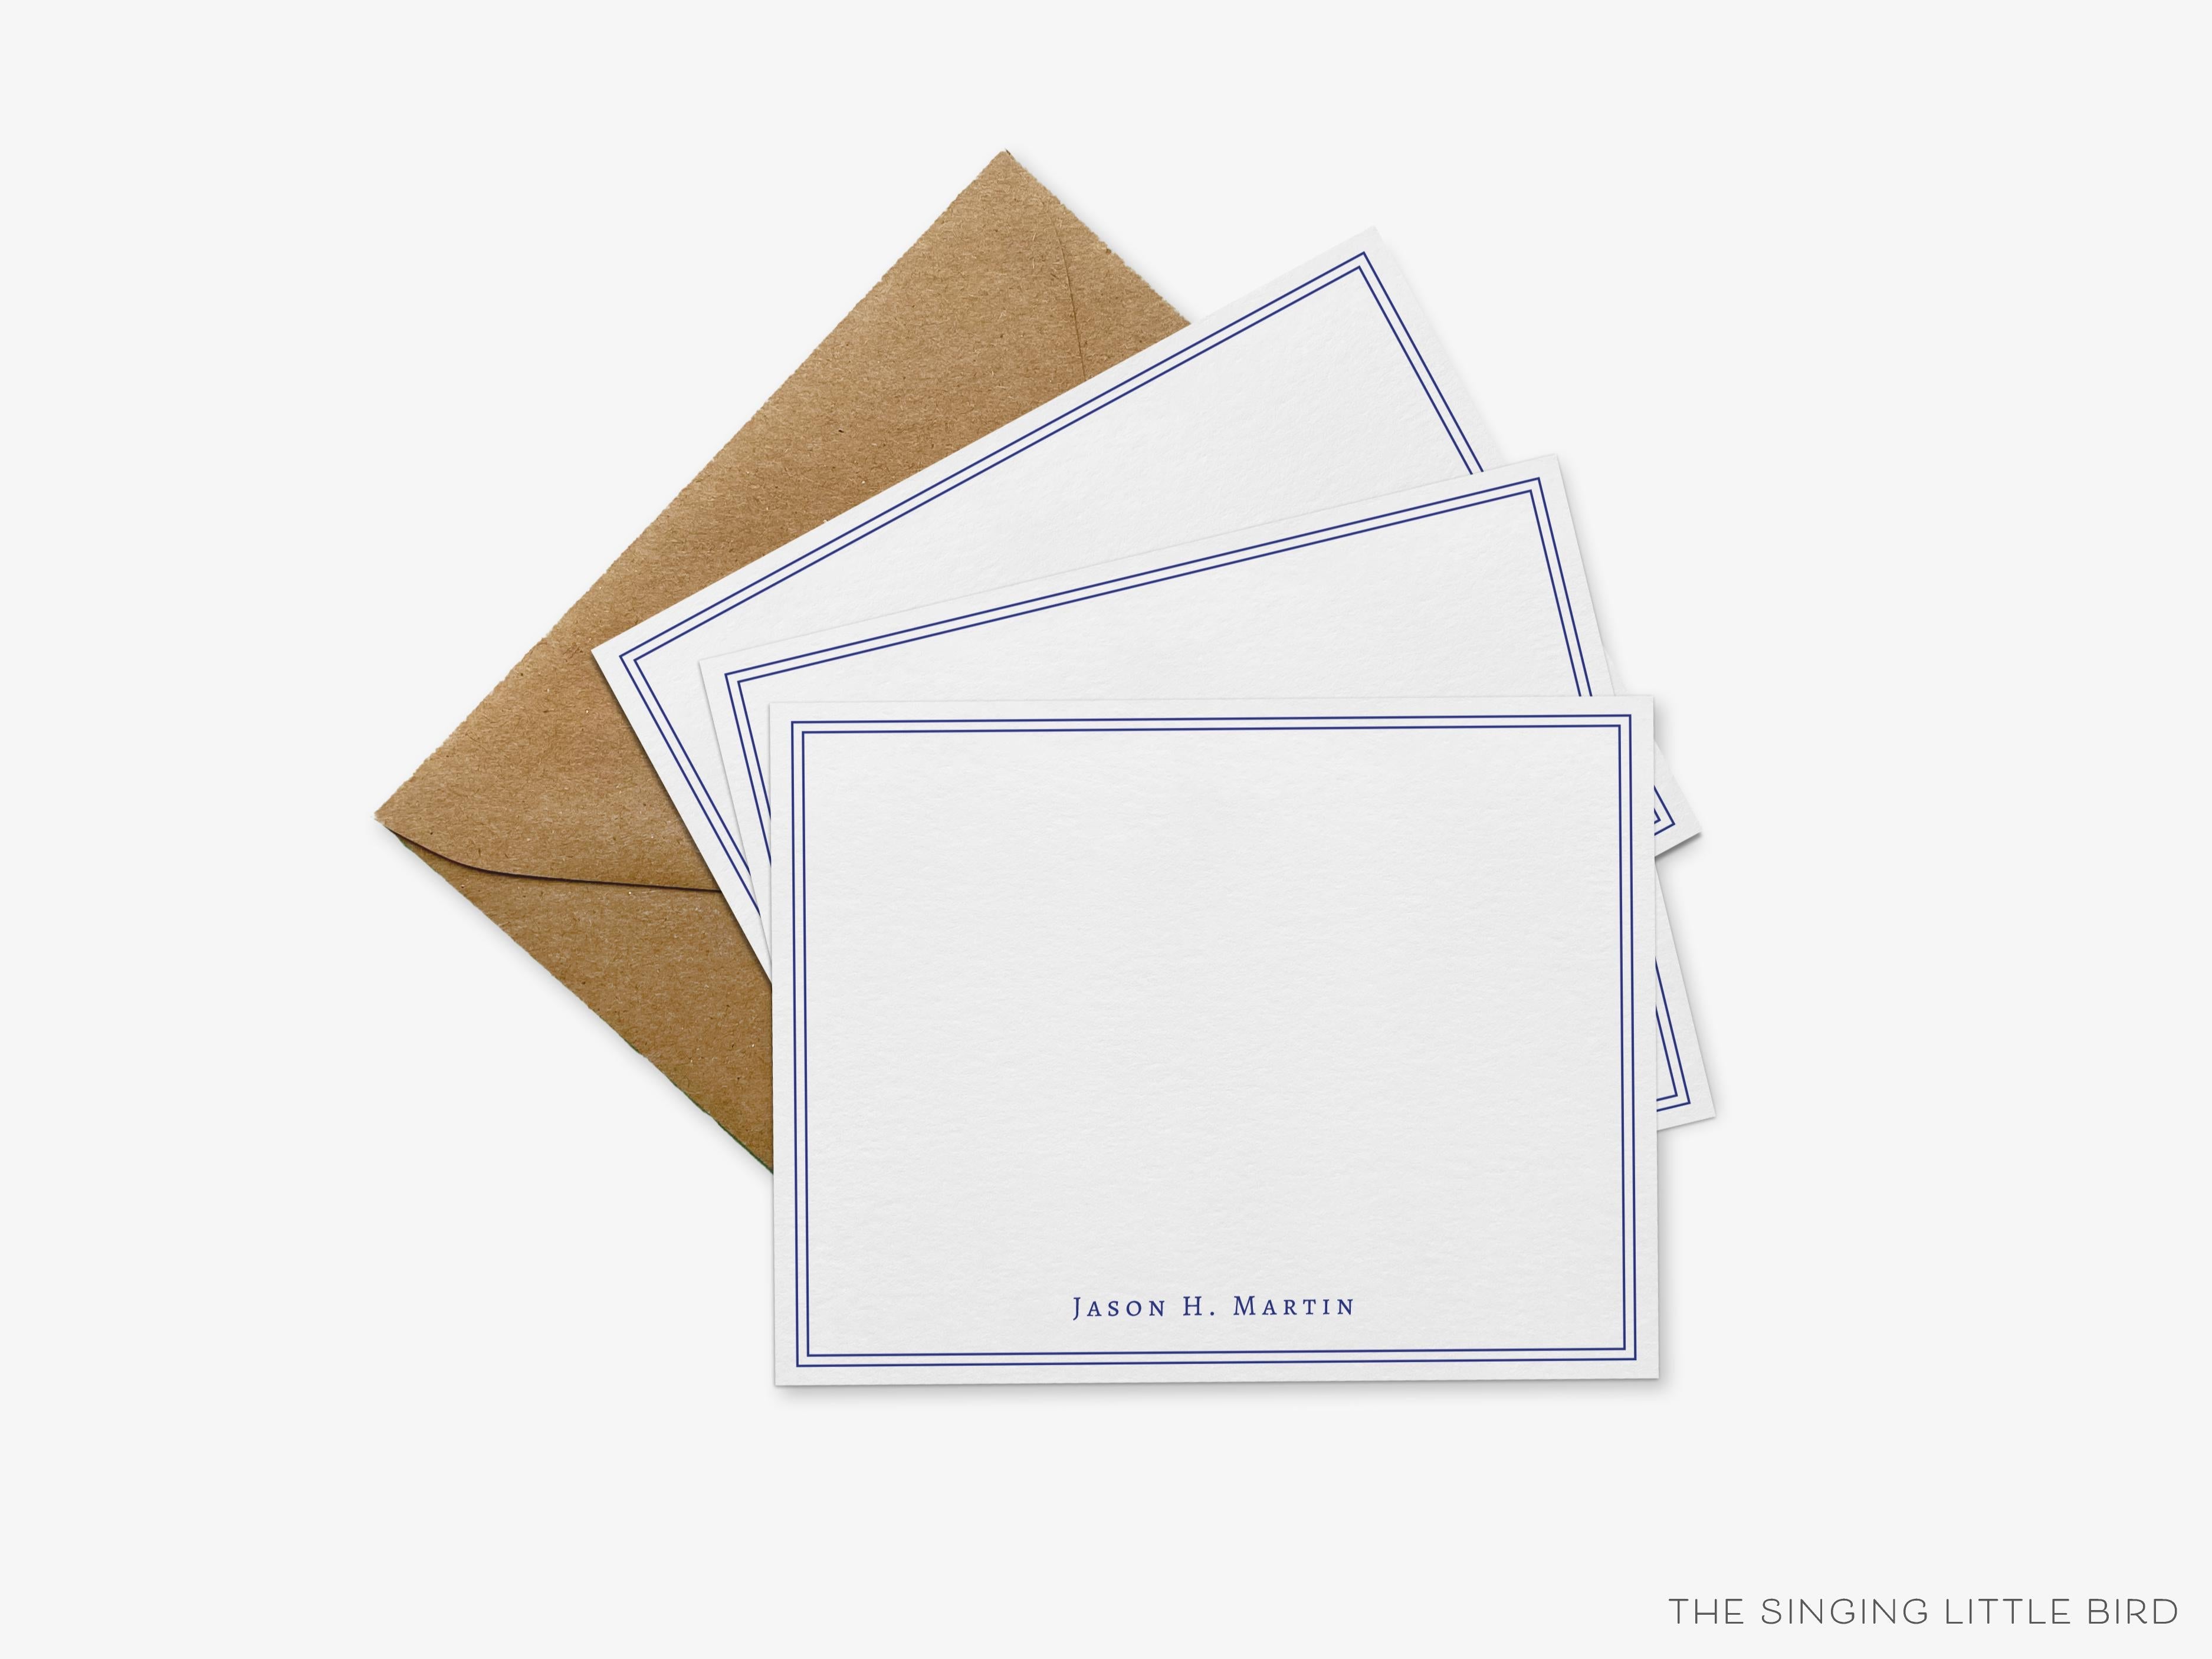 Men's Personalized Flat Notes-These personalized flat notecards are 4.25x5.5 and feature simple text and border, printed in the USA on 120lb textured stock. They come with your choice of envelopes and make great thank yous and gifts for the modern lover in your life.-The Singing Little Bird